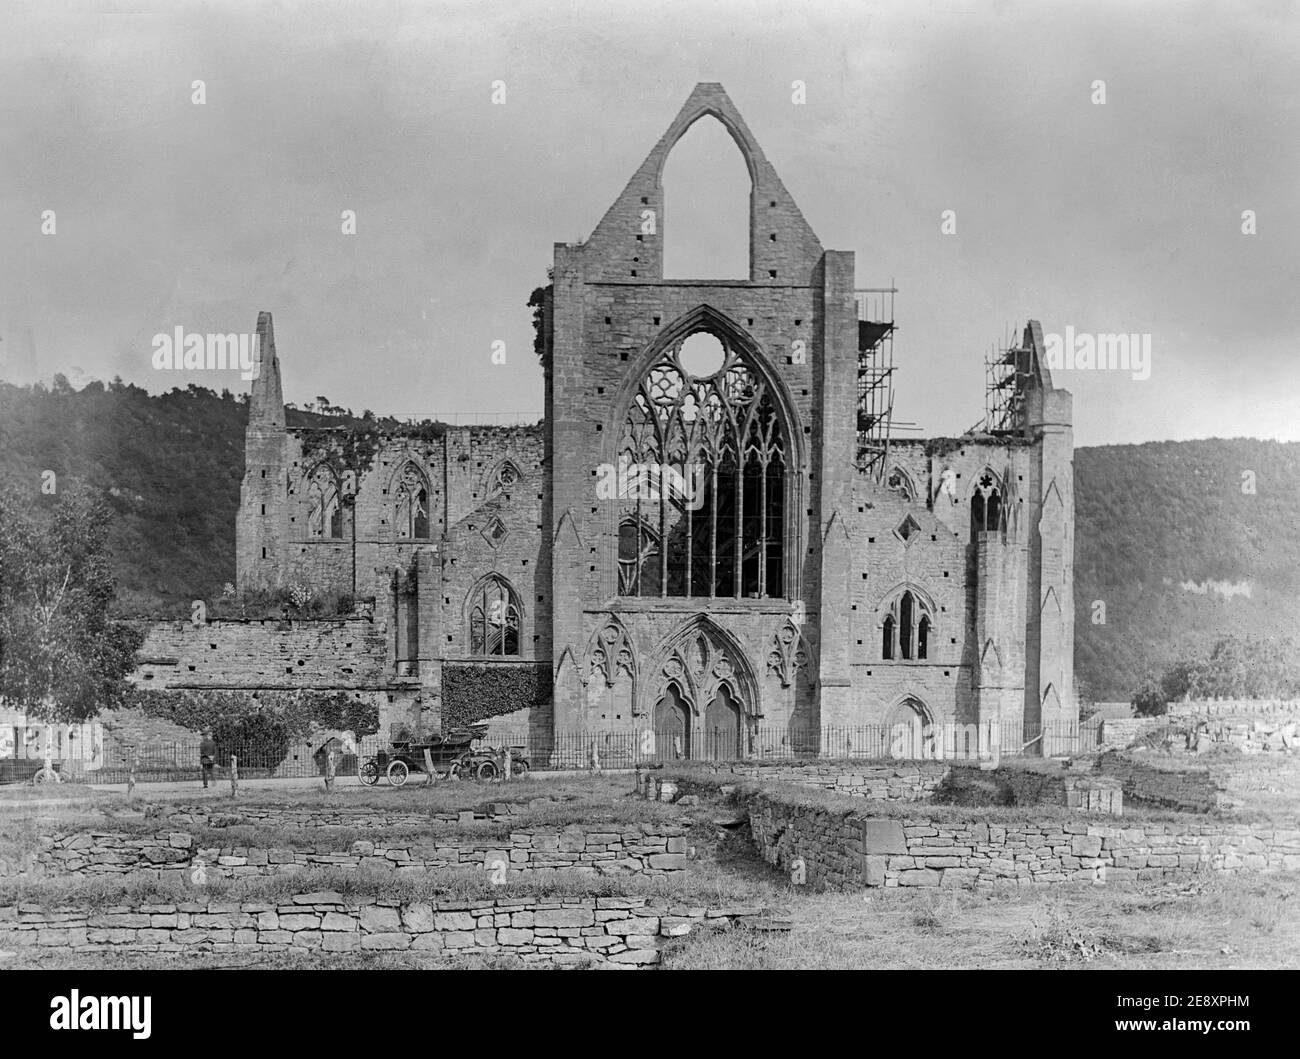 An Edwardian black and white vintage photograph showing Tintern Abbey in Monmouthshire, near the border of Wales and England. Stock Photo